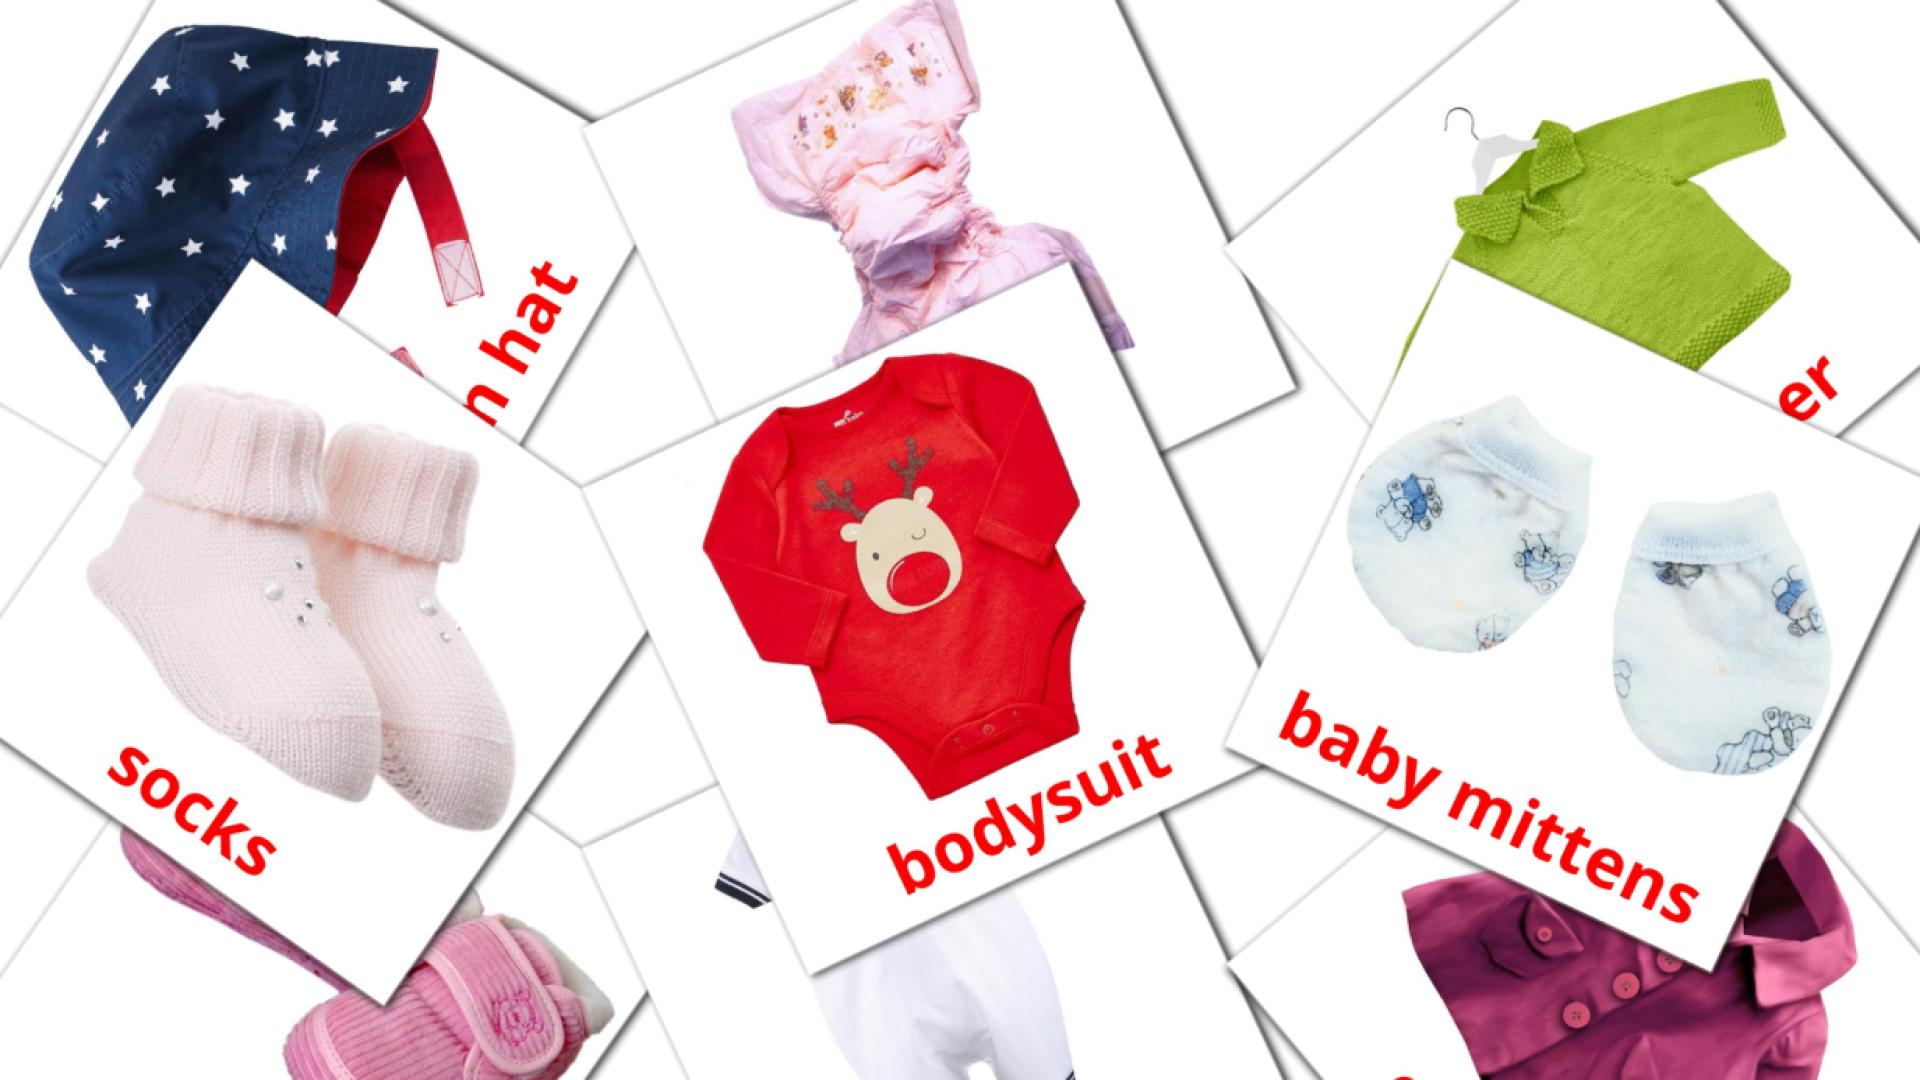 12 Baby clothes flashcards